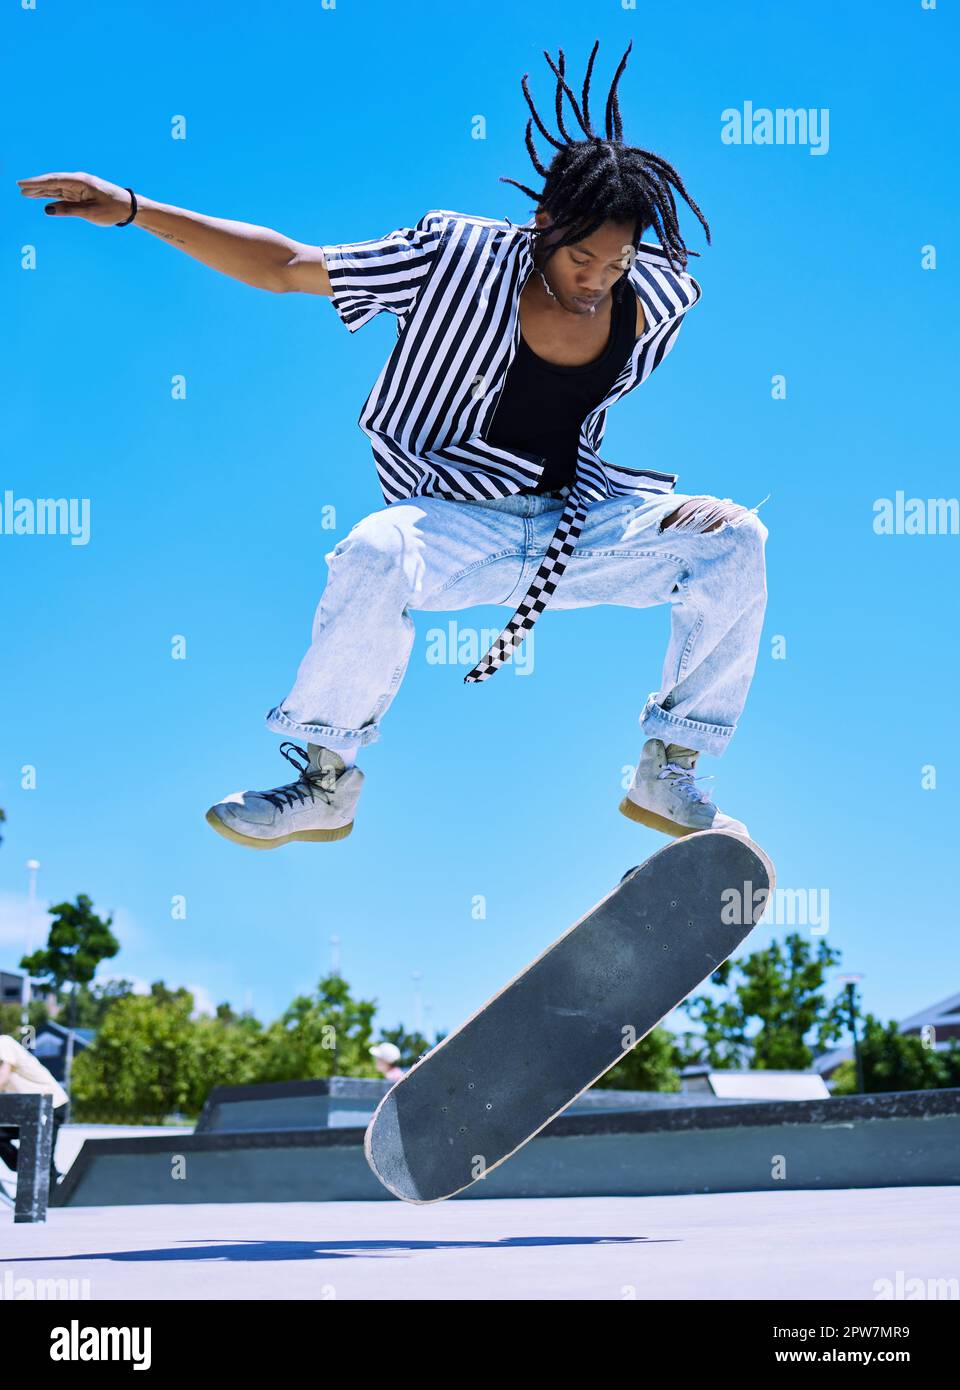 Cool young, stylish african american boy performing skate tricks on his board at the skate park. Focused young man performing ollies on his skateboard Stock Photo